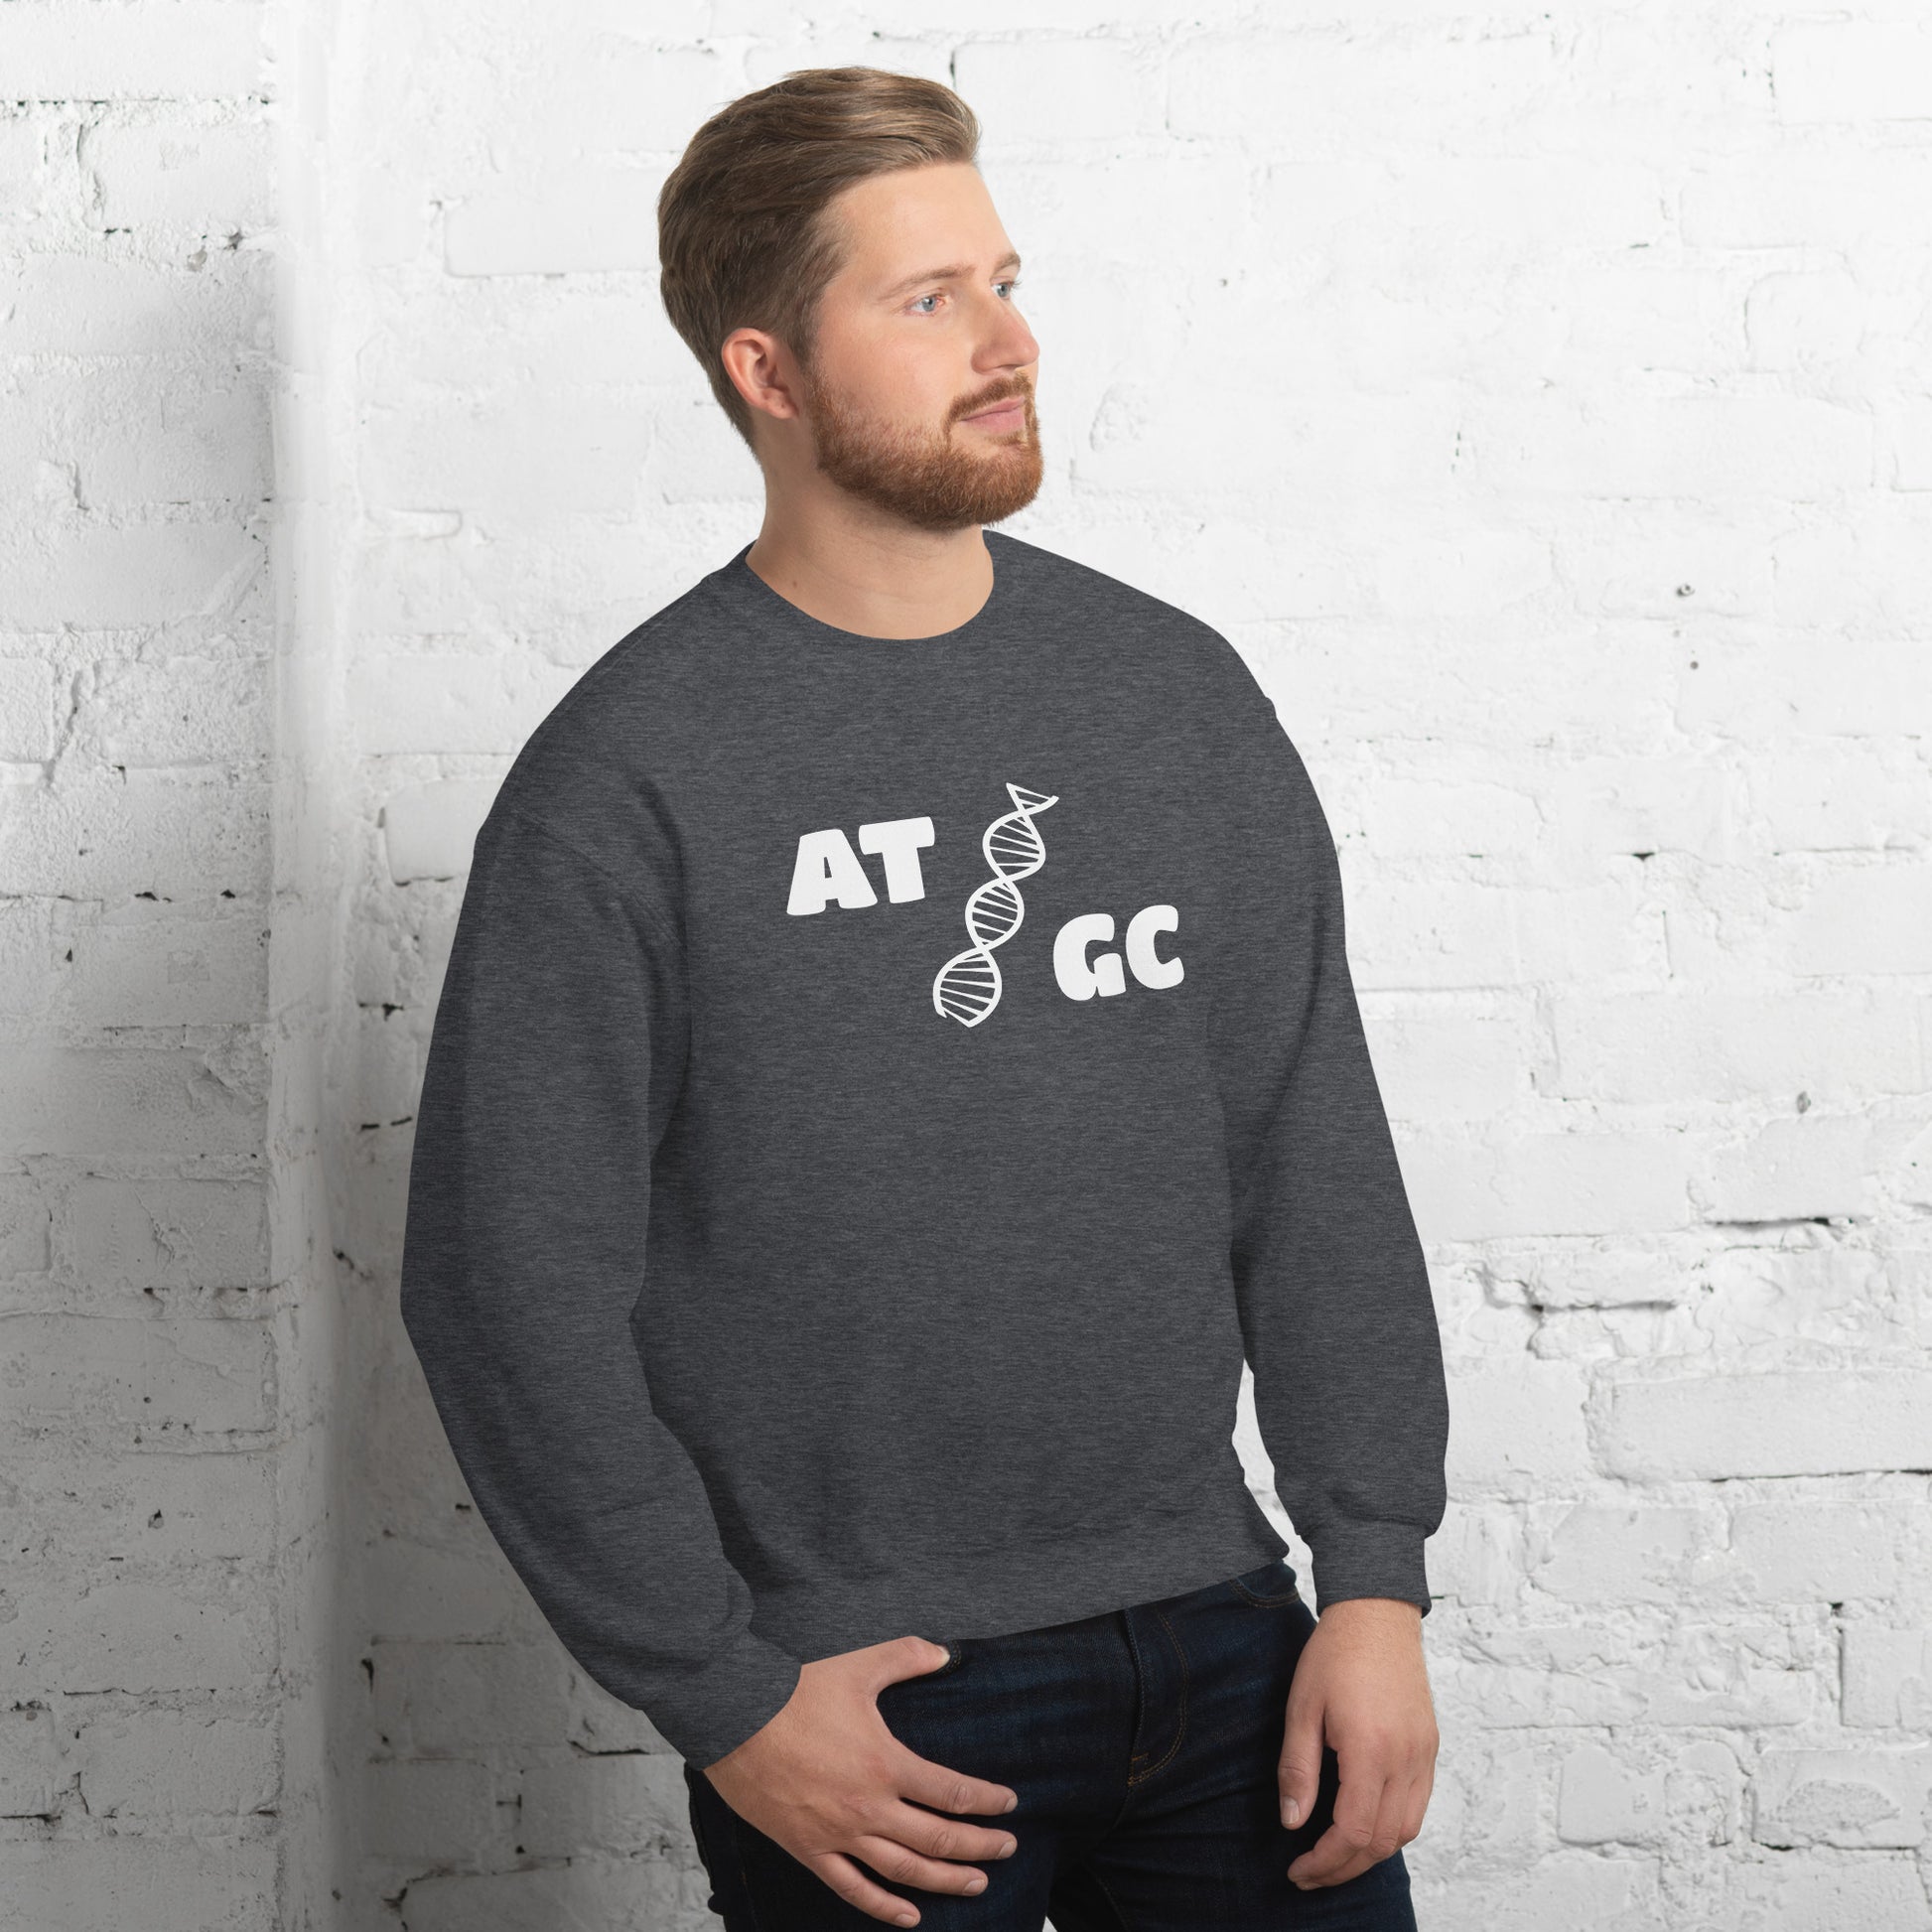 Men with dark grey sweatshirt with image of a DNA string and the text "ATGC"